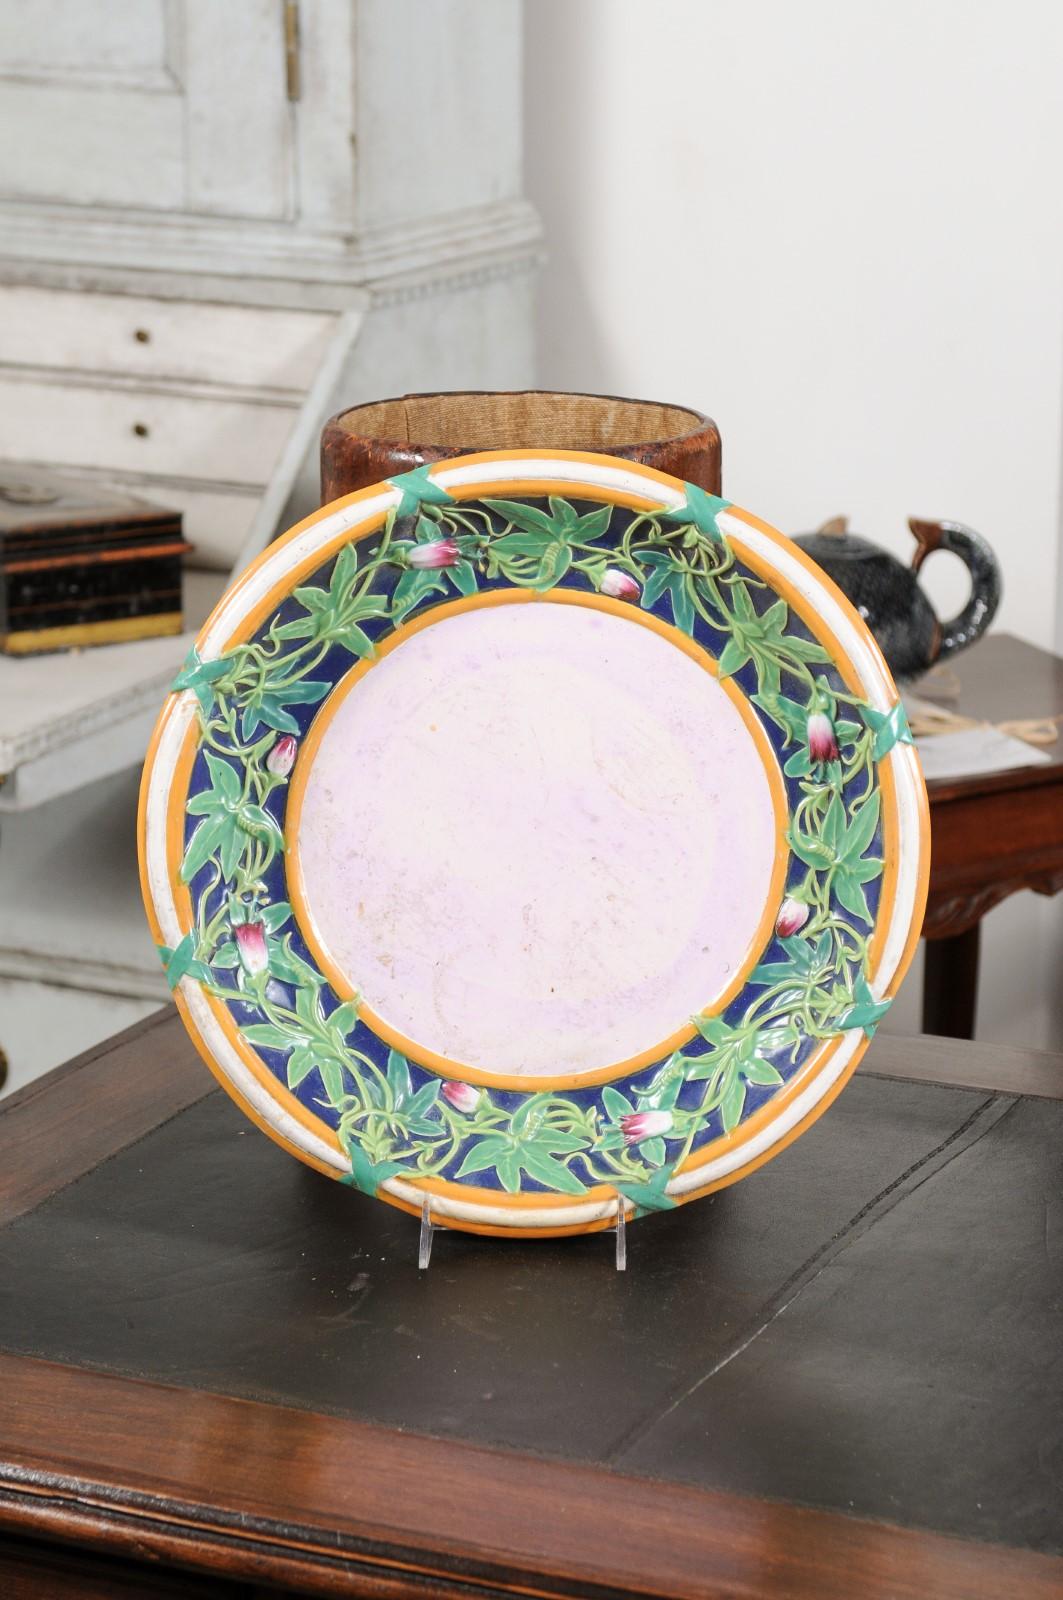 An English Minton Majolica platter from the mid 19th century, with floral motifs. Created in England during the 1850s, this Minton Majolica platter charms us with its ingenious design. Scrolling ivy with petite pink flowers adorns the platter border